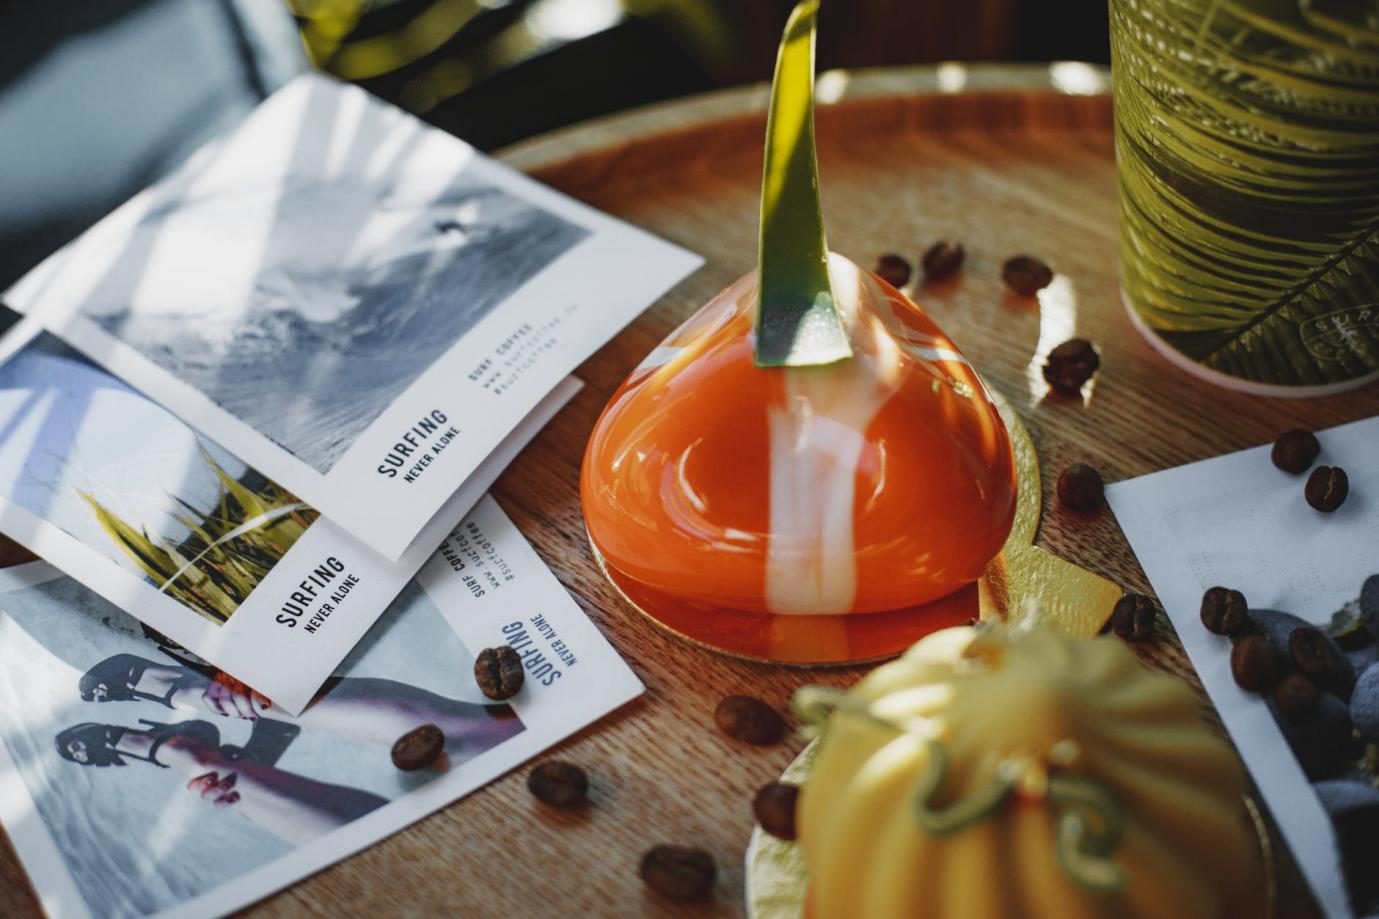 Flyers, coffee beans, and other decorative items on table.